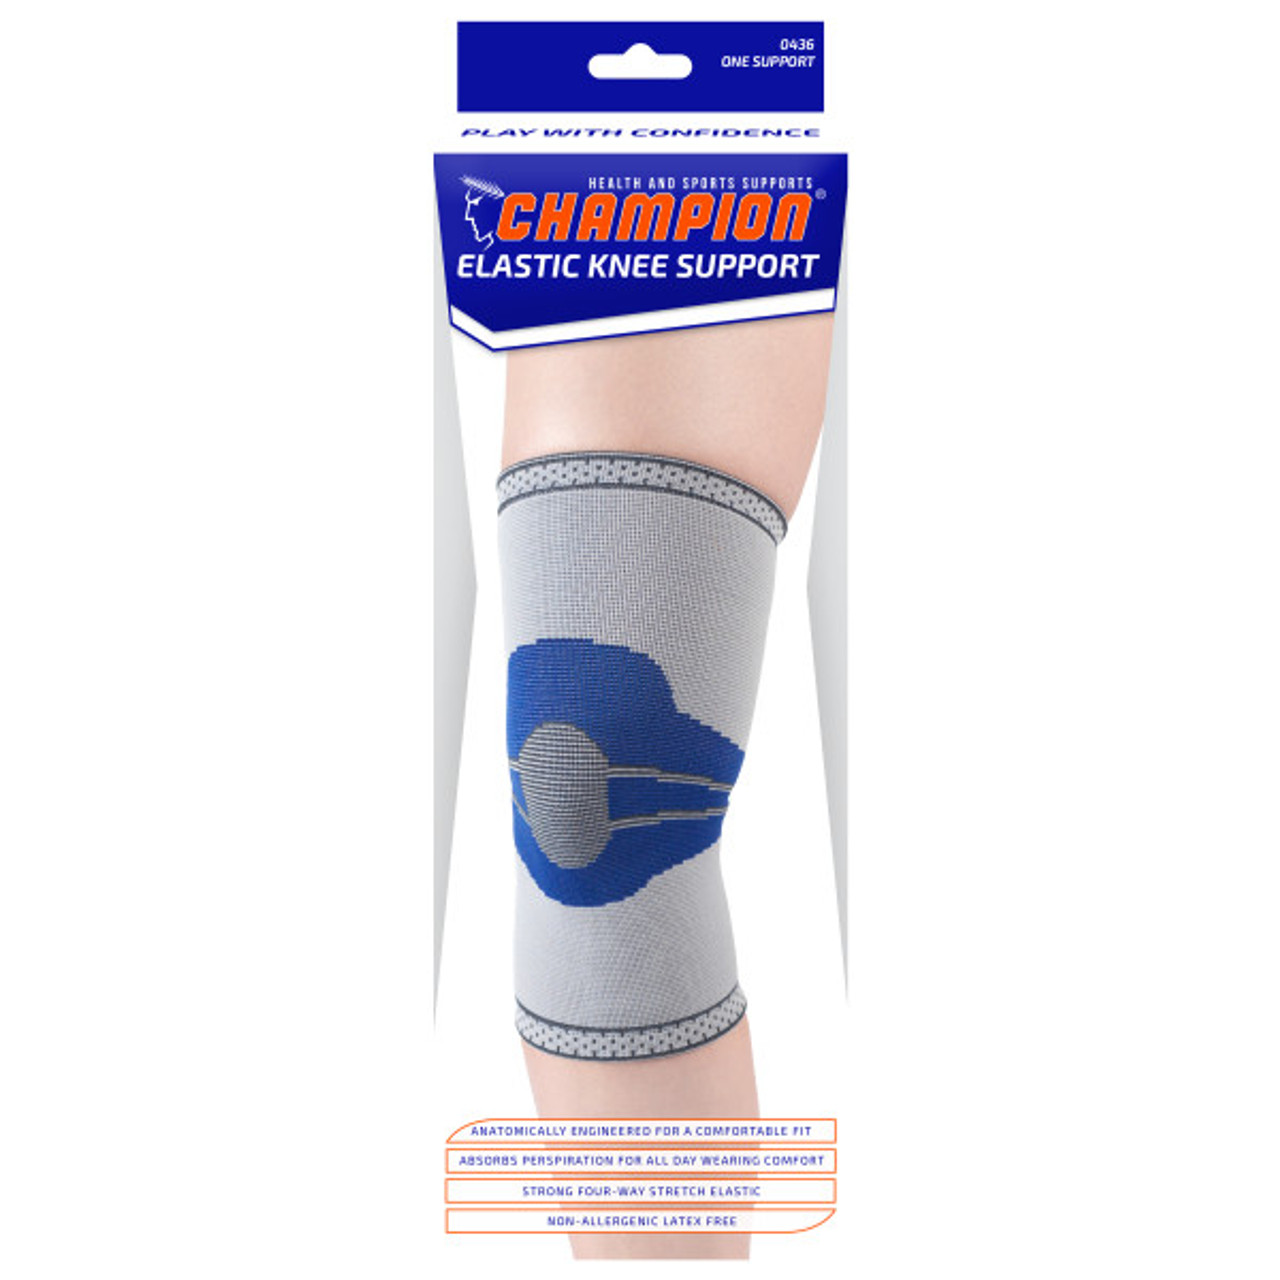 Champion 0435-L CHAMPION ELASTIC KNEE SUPPORT WITH FLEXIBLE STAYS LIGHT GREY, Large, Each